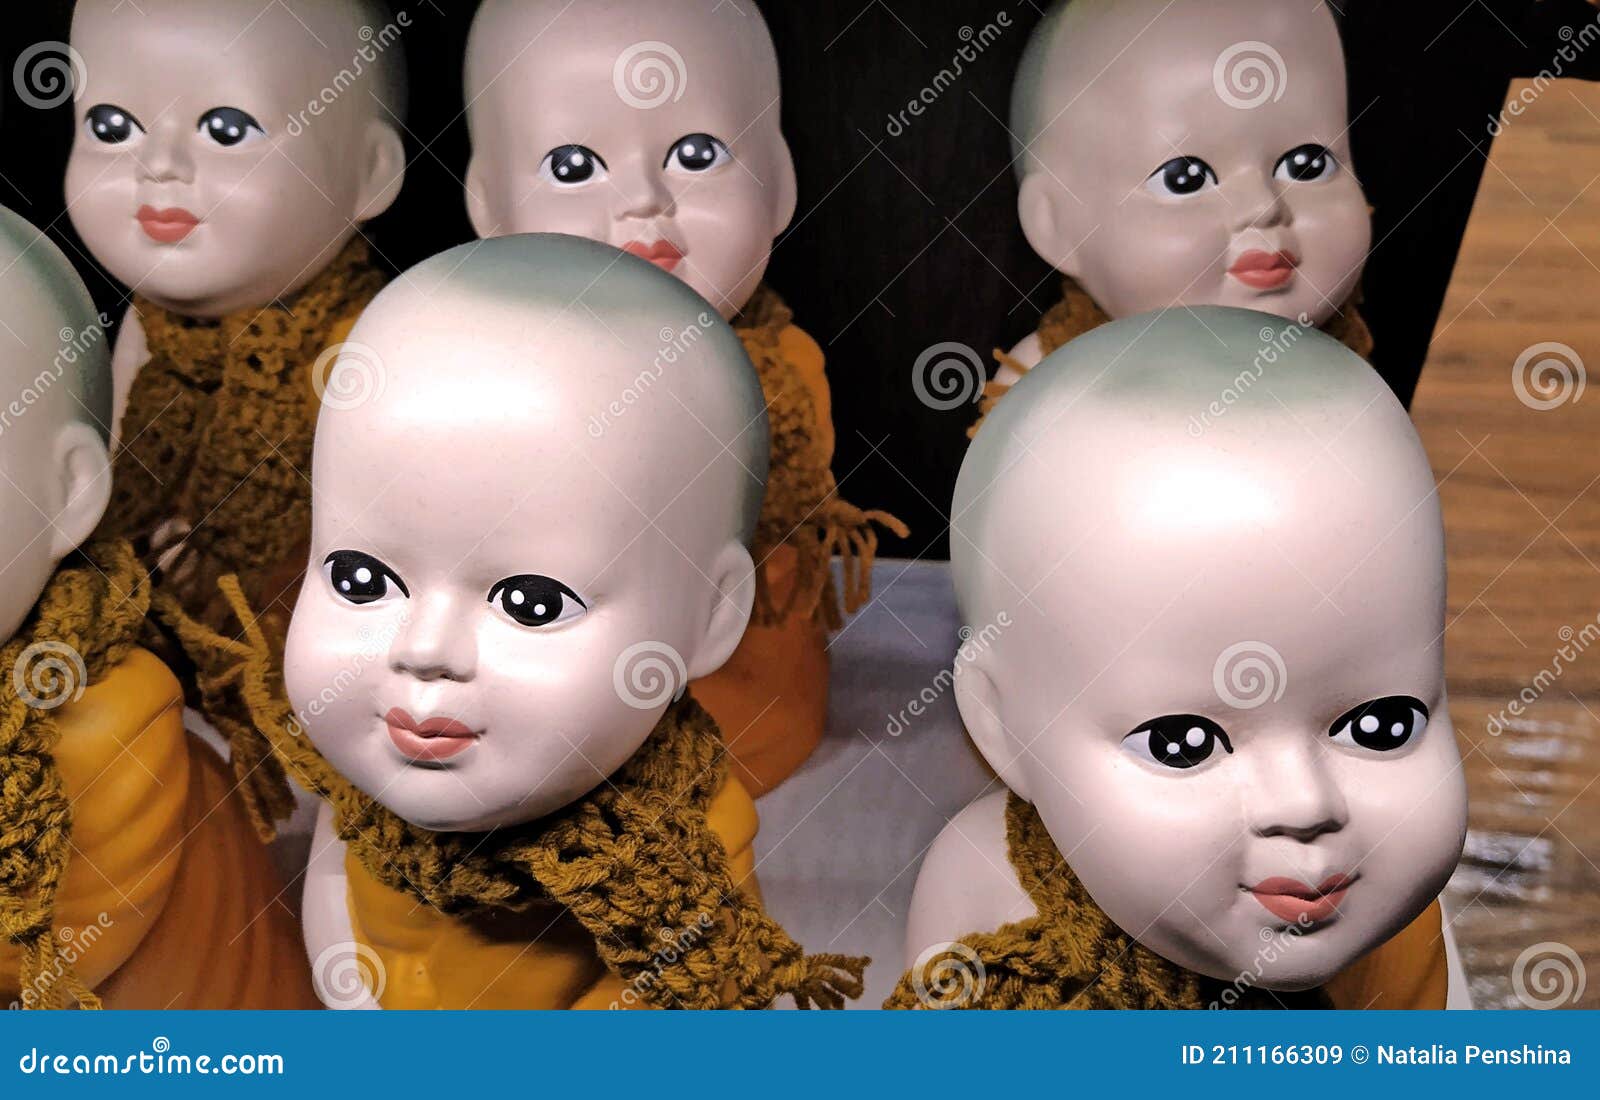 Doll Figures, with Big Eyes, No Hair on Their Heads, Dressed in Orange Monk  Clothes and Knitted Scarves. Stock Image - Image of head, grimace: 211166309